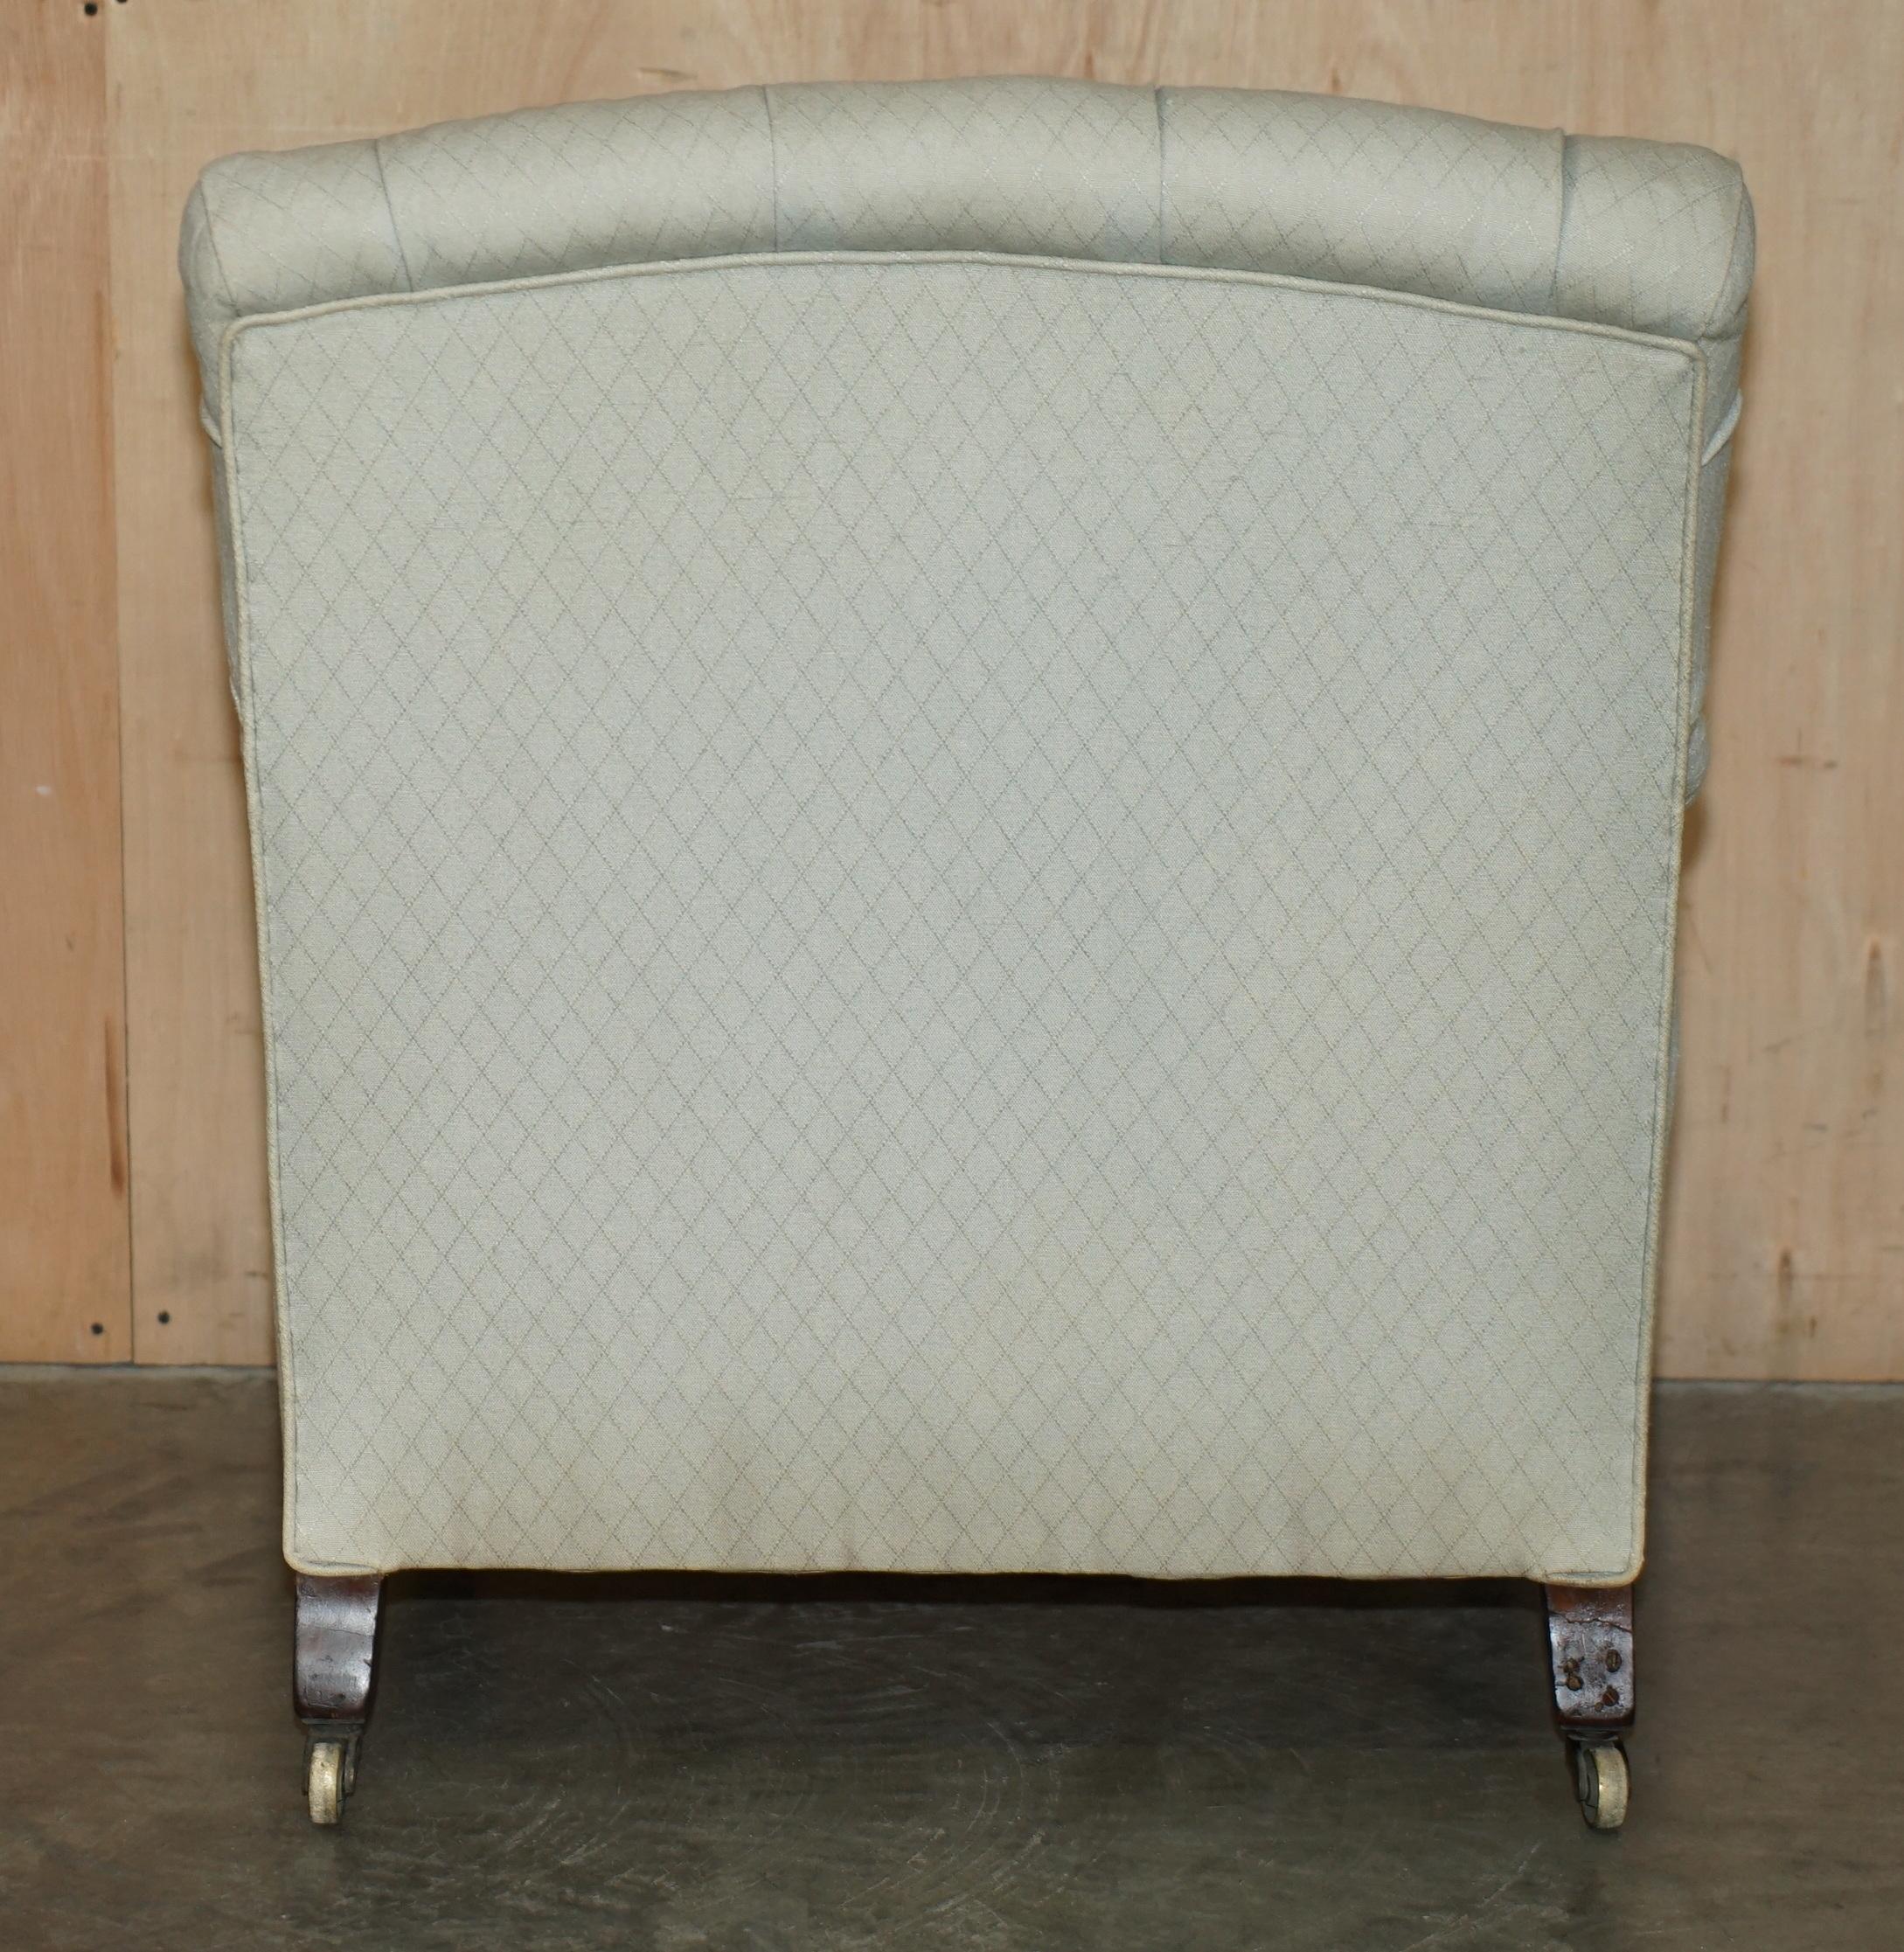 RARE ORIGINAL ViCTORIAN HOWARD & SONS BRIDGEWATER ARMCHAIR PERIOD UPHOLSTERY For Sale 6